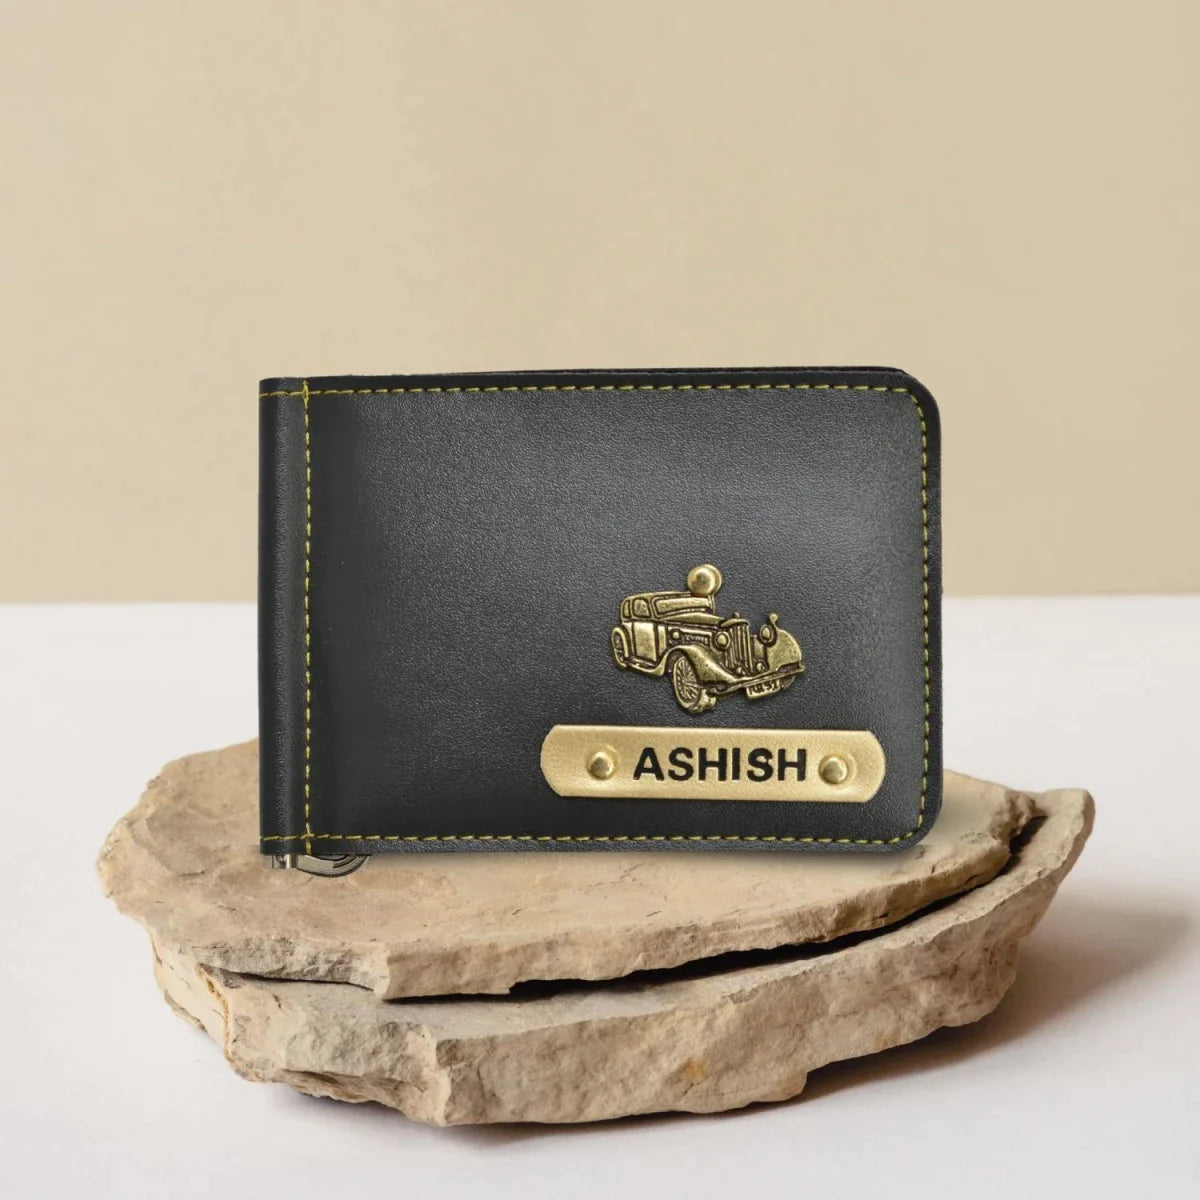 Stay organized and stylish with our customized vegan leather money clip, featuring a sleek design.